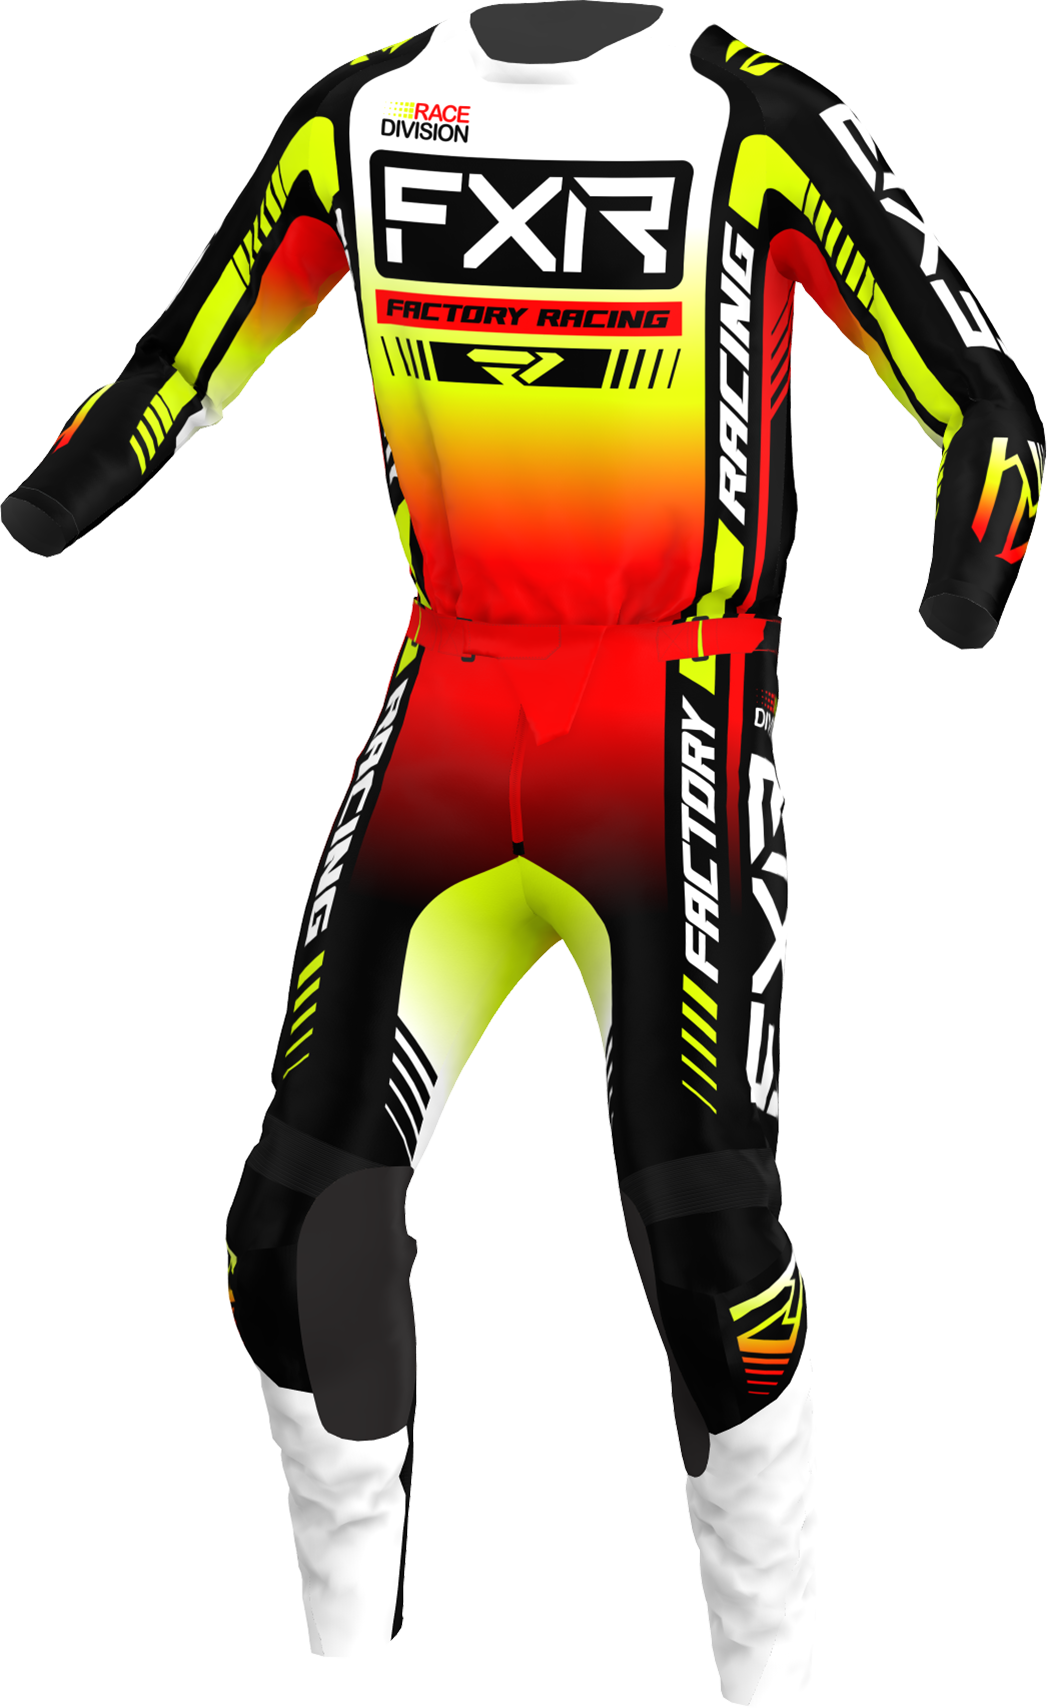 A 3D image of FXR's Clutch Pro MX Jersey and Pant in Black/White/Hi-Vis colorway